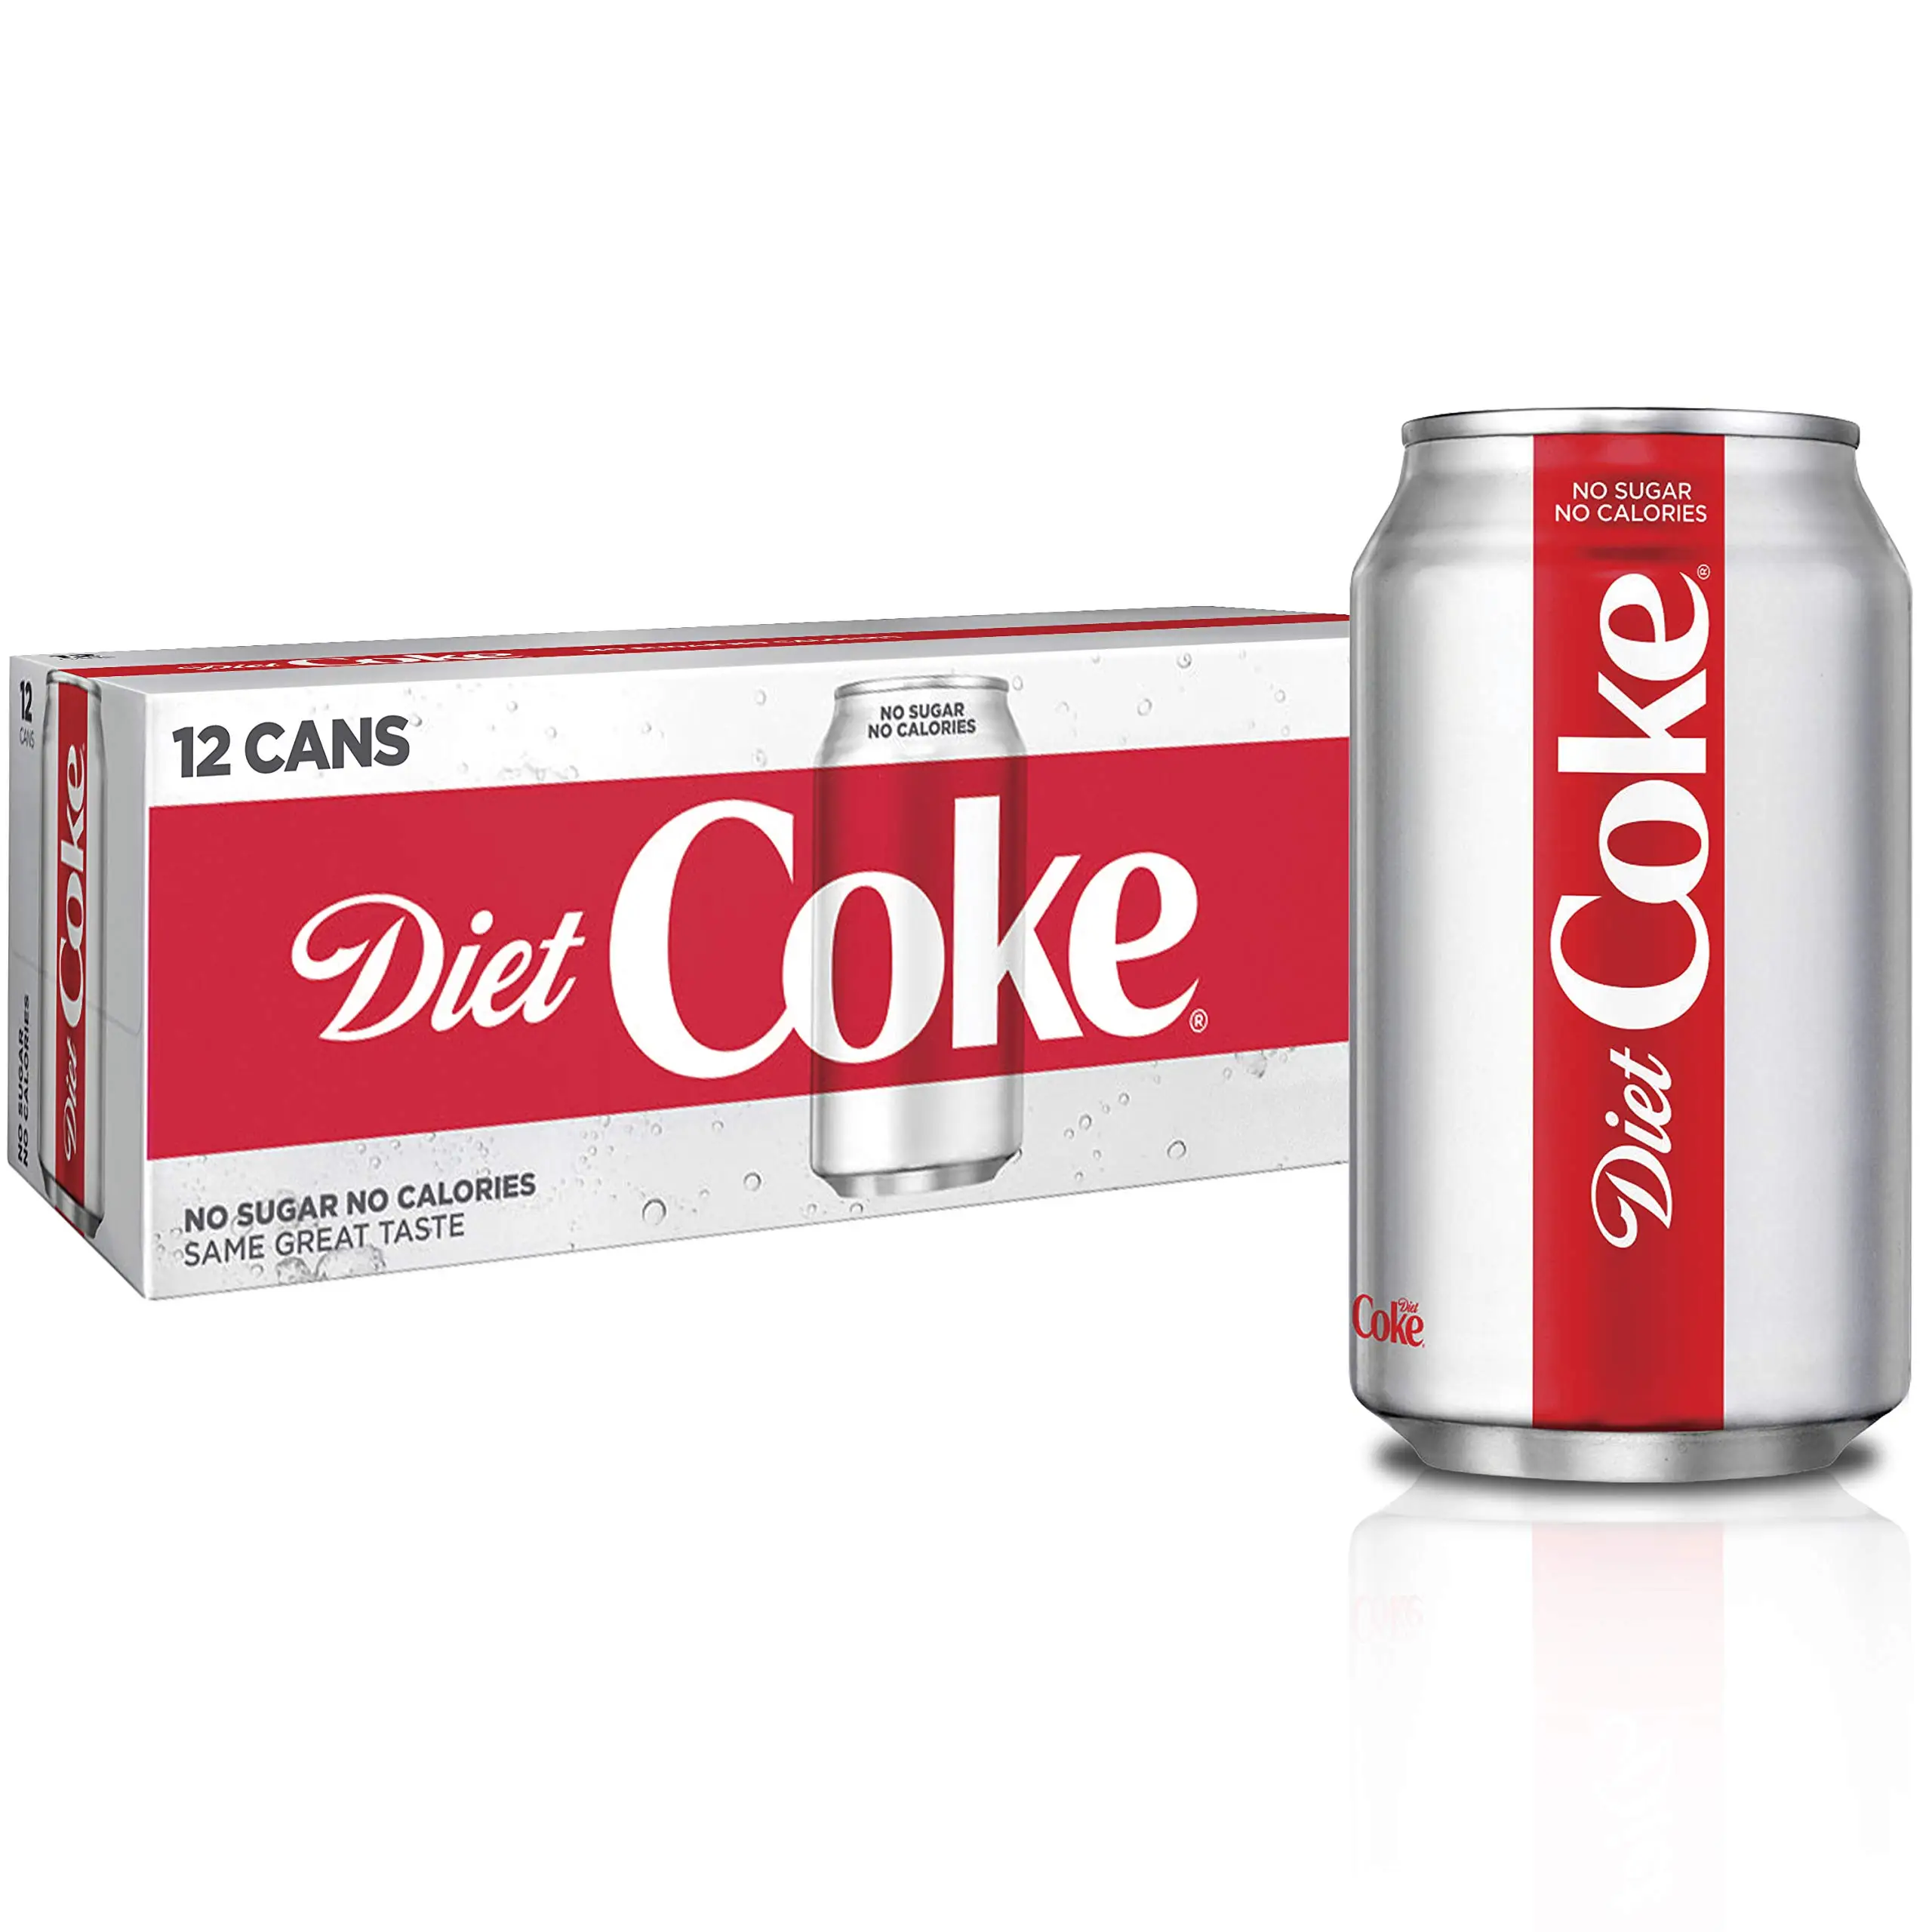 Original can and bottled Coca Cola / Diet Coke